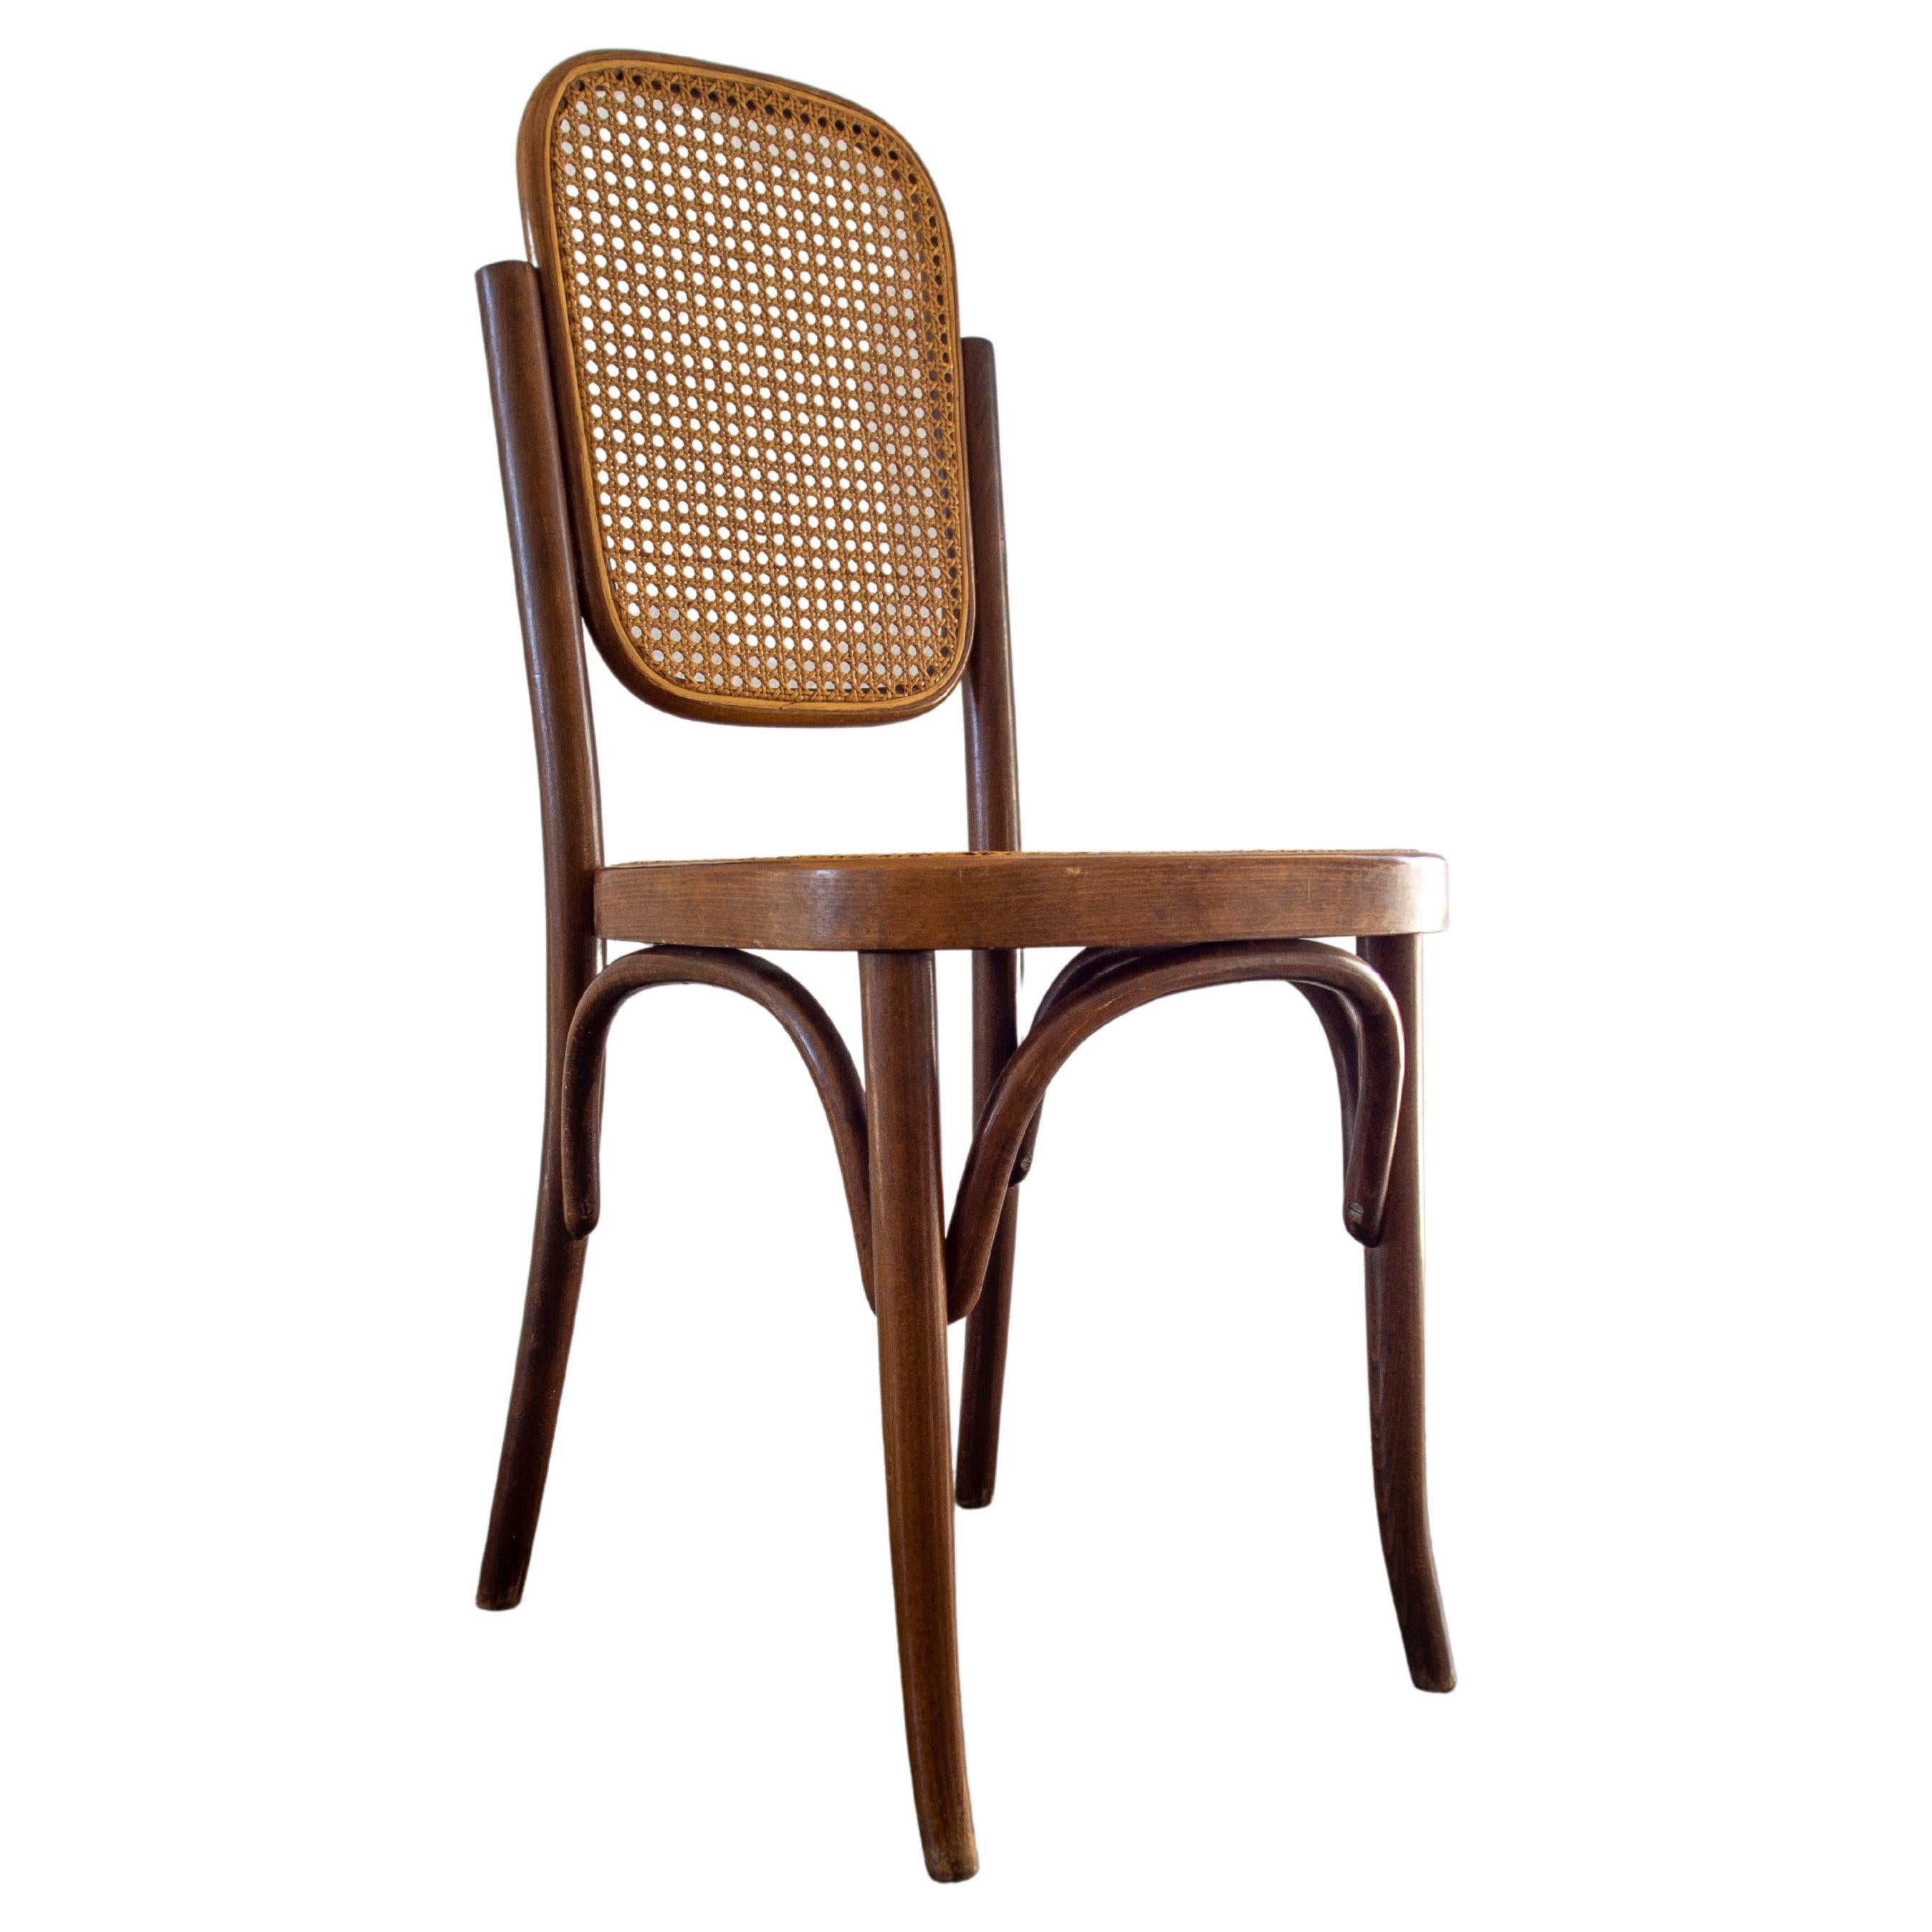 Vintage Set of 4 Dining Chairs in Rattan and Bentwood by Mundus, Yugoslavia 1970 For Sale